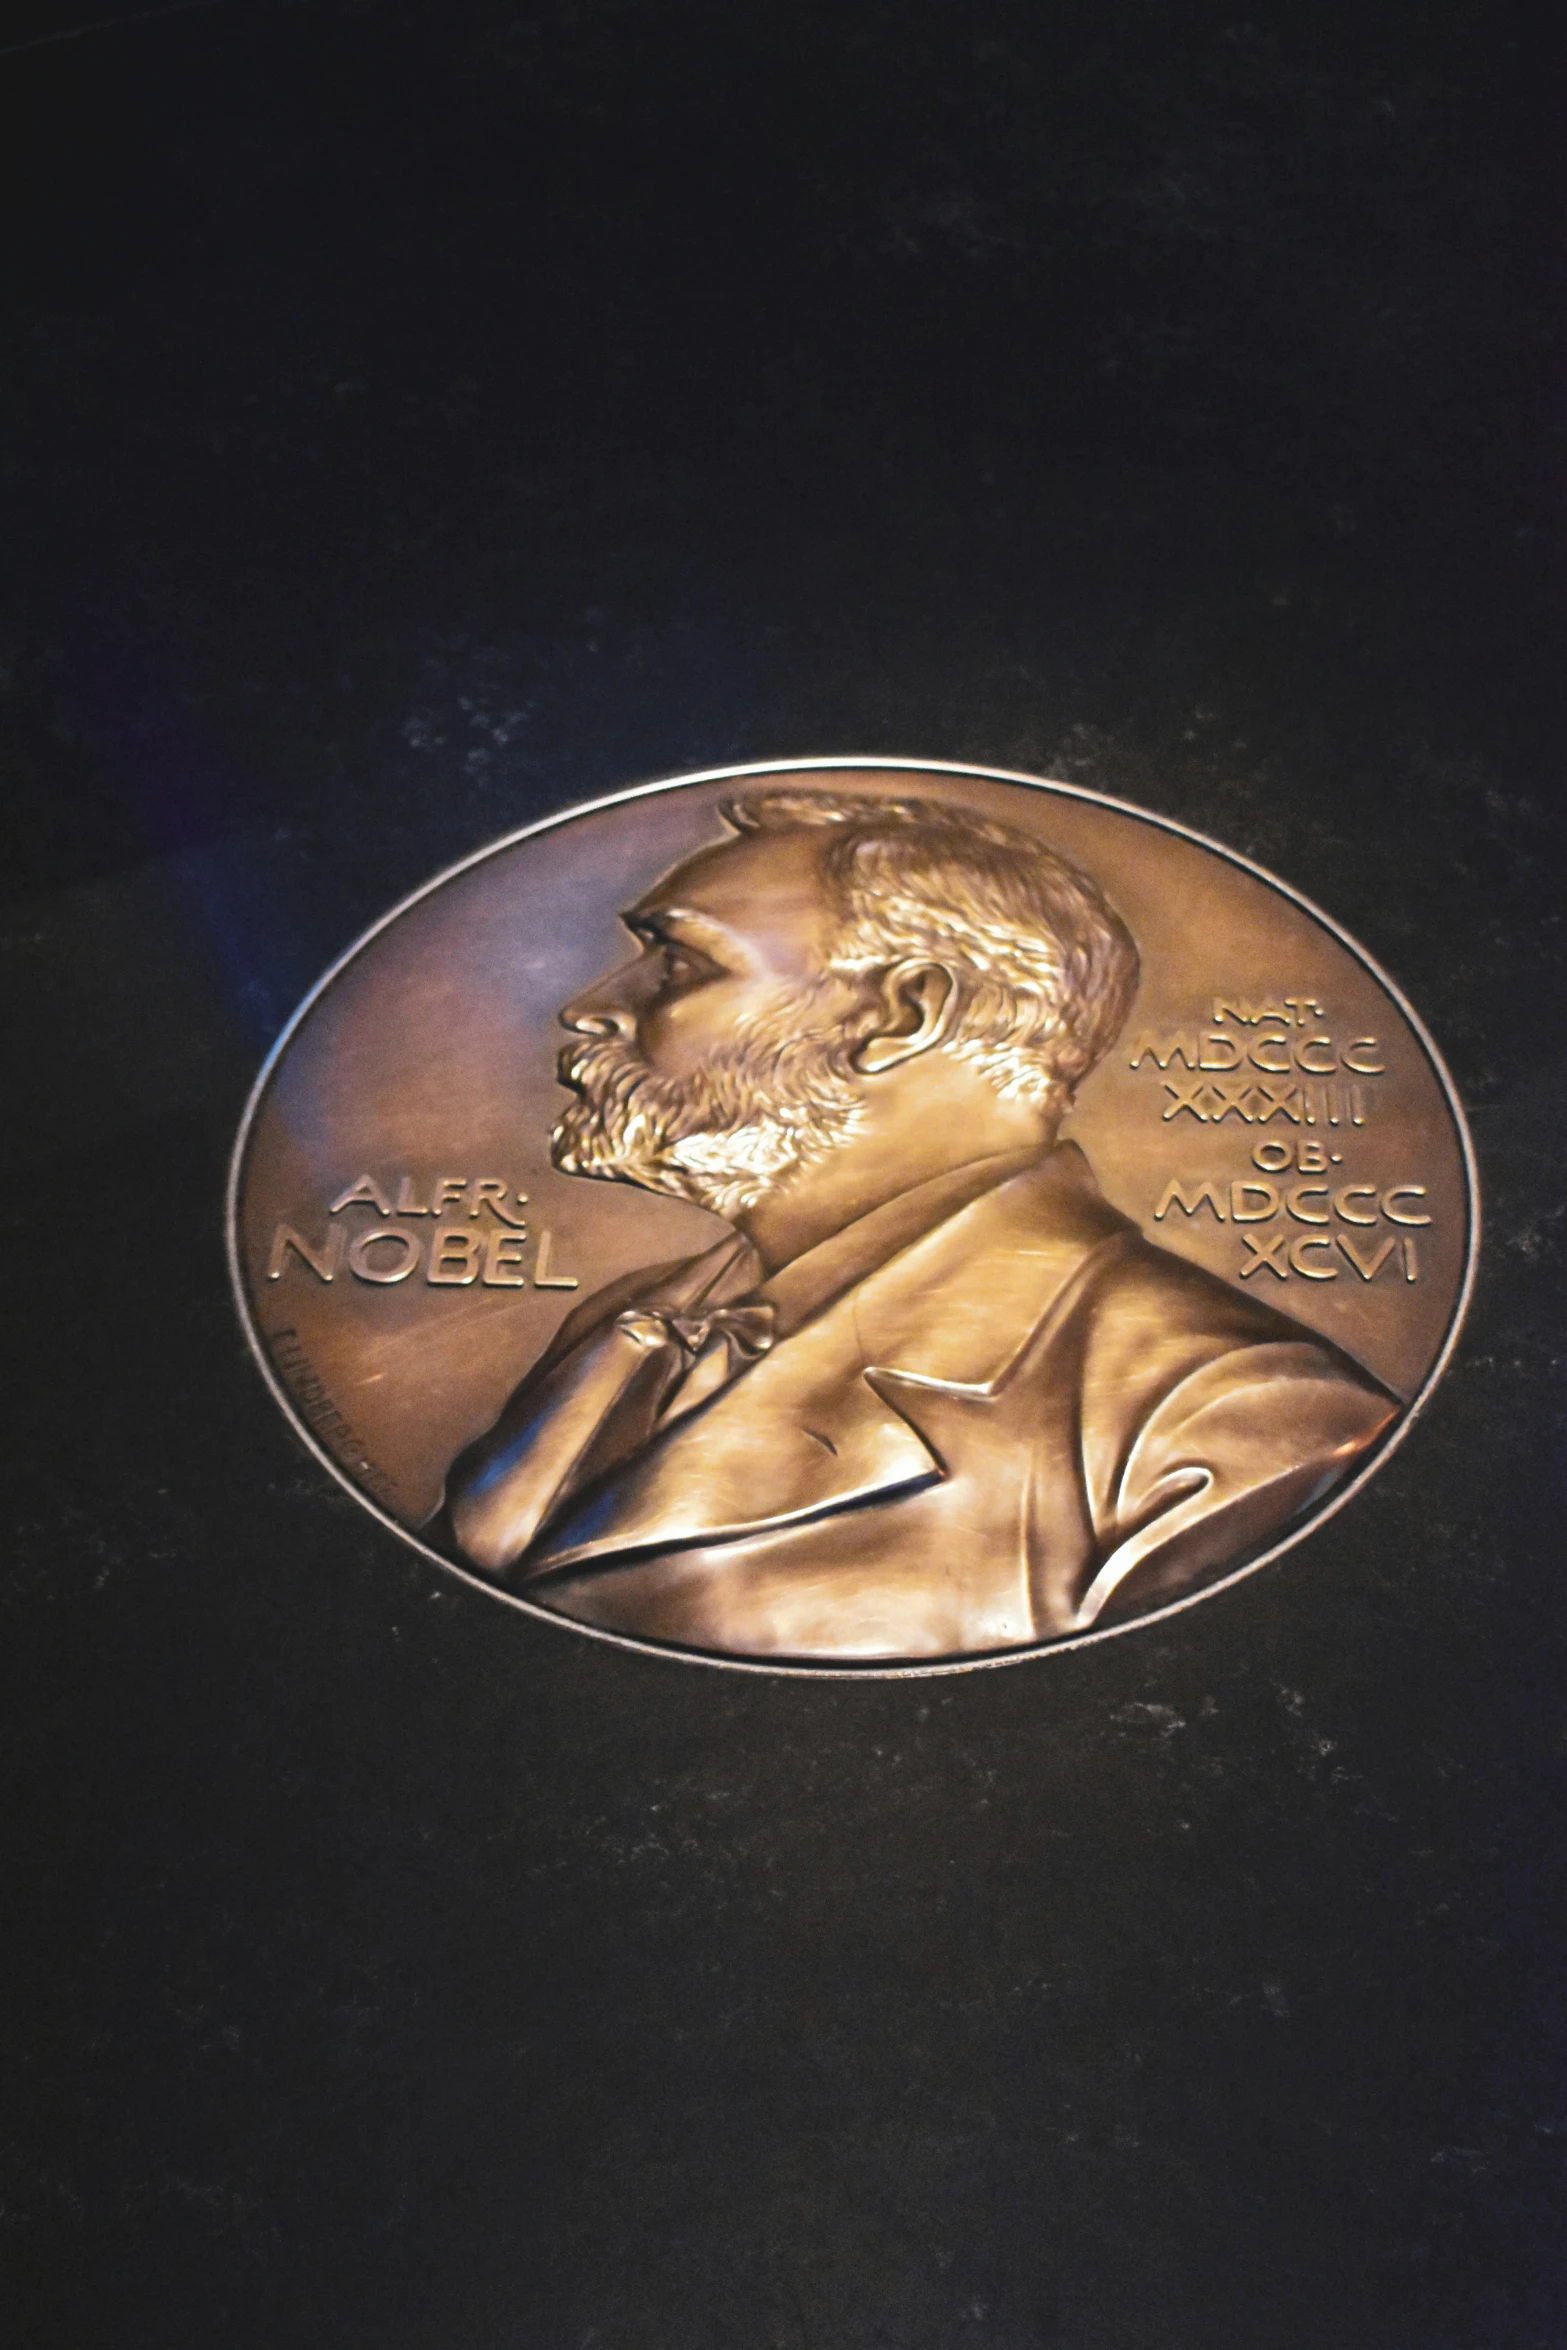 a portrait of aham lincoln is on a metal coin